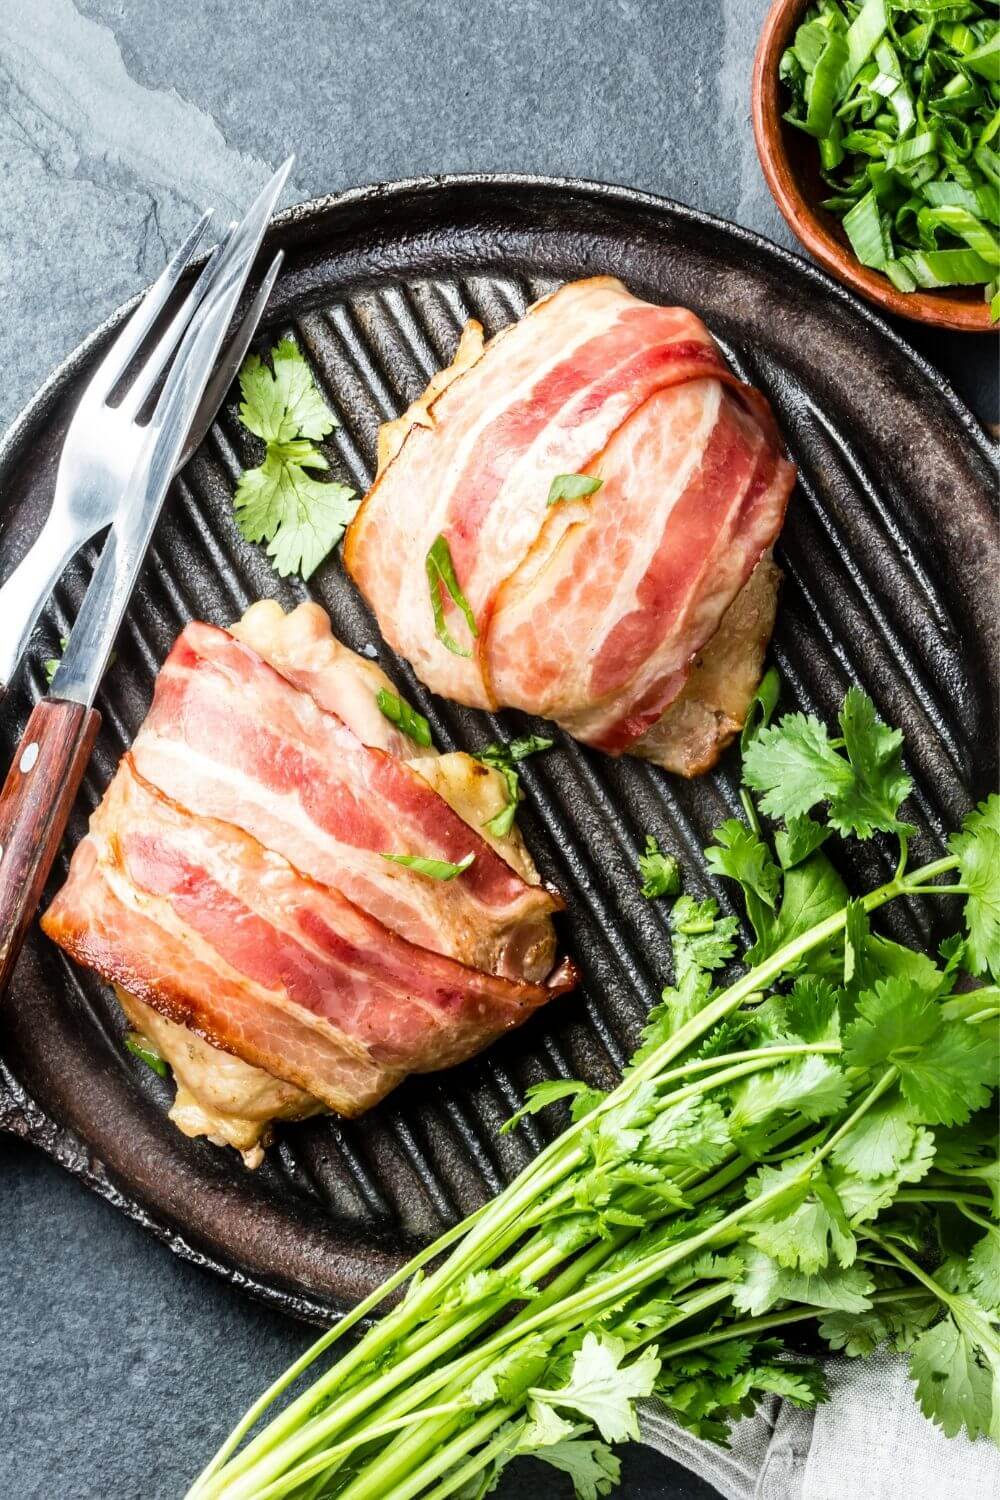 Who's tried our Bacon Wrapped Stuffed Chicken in the air fryer ...